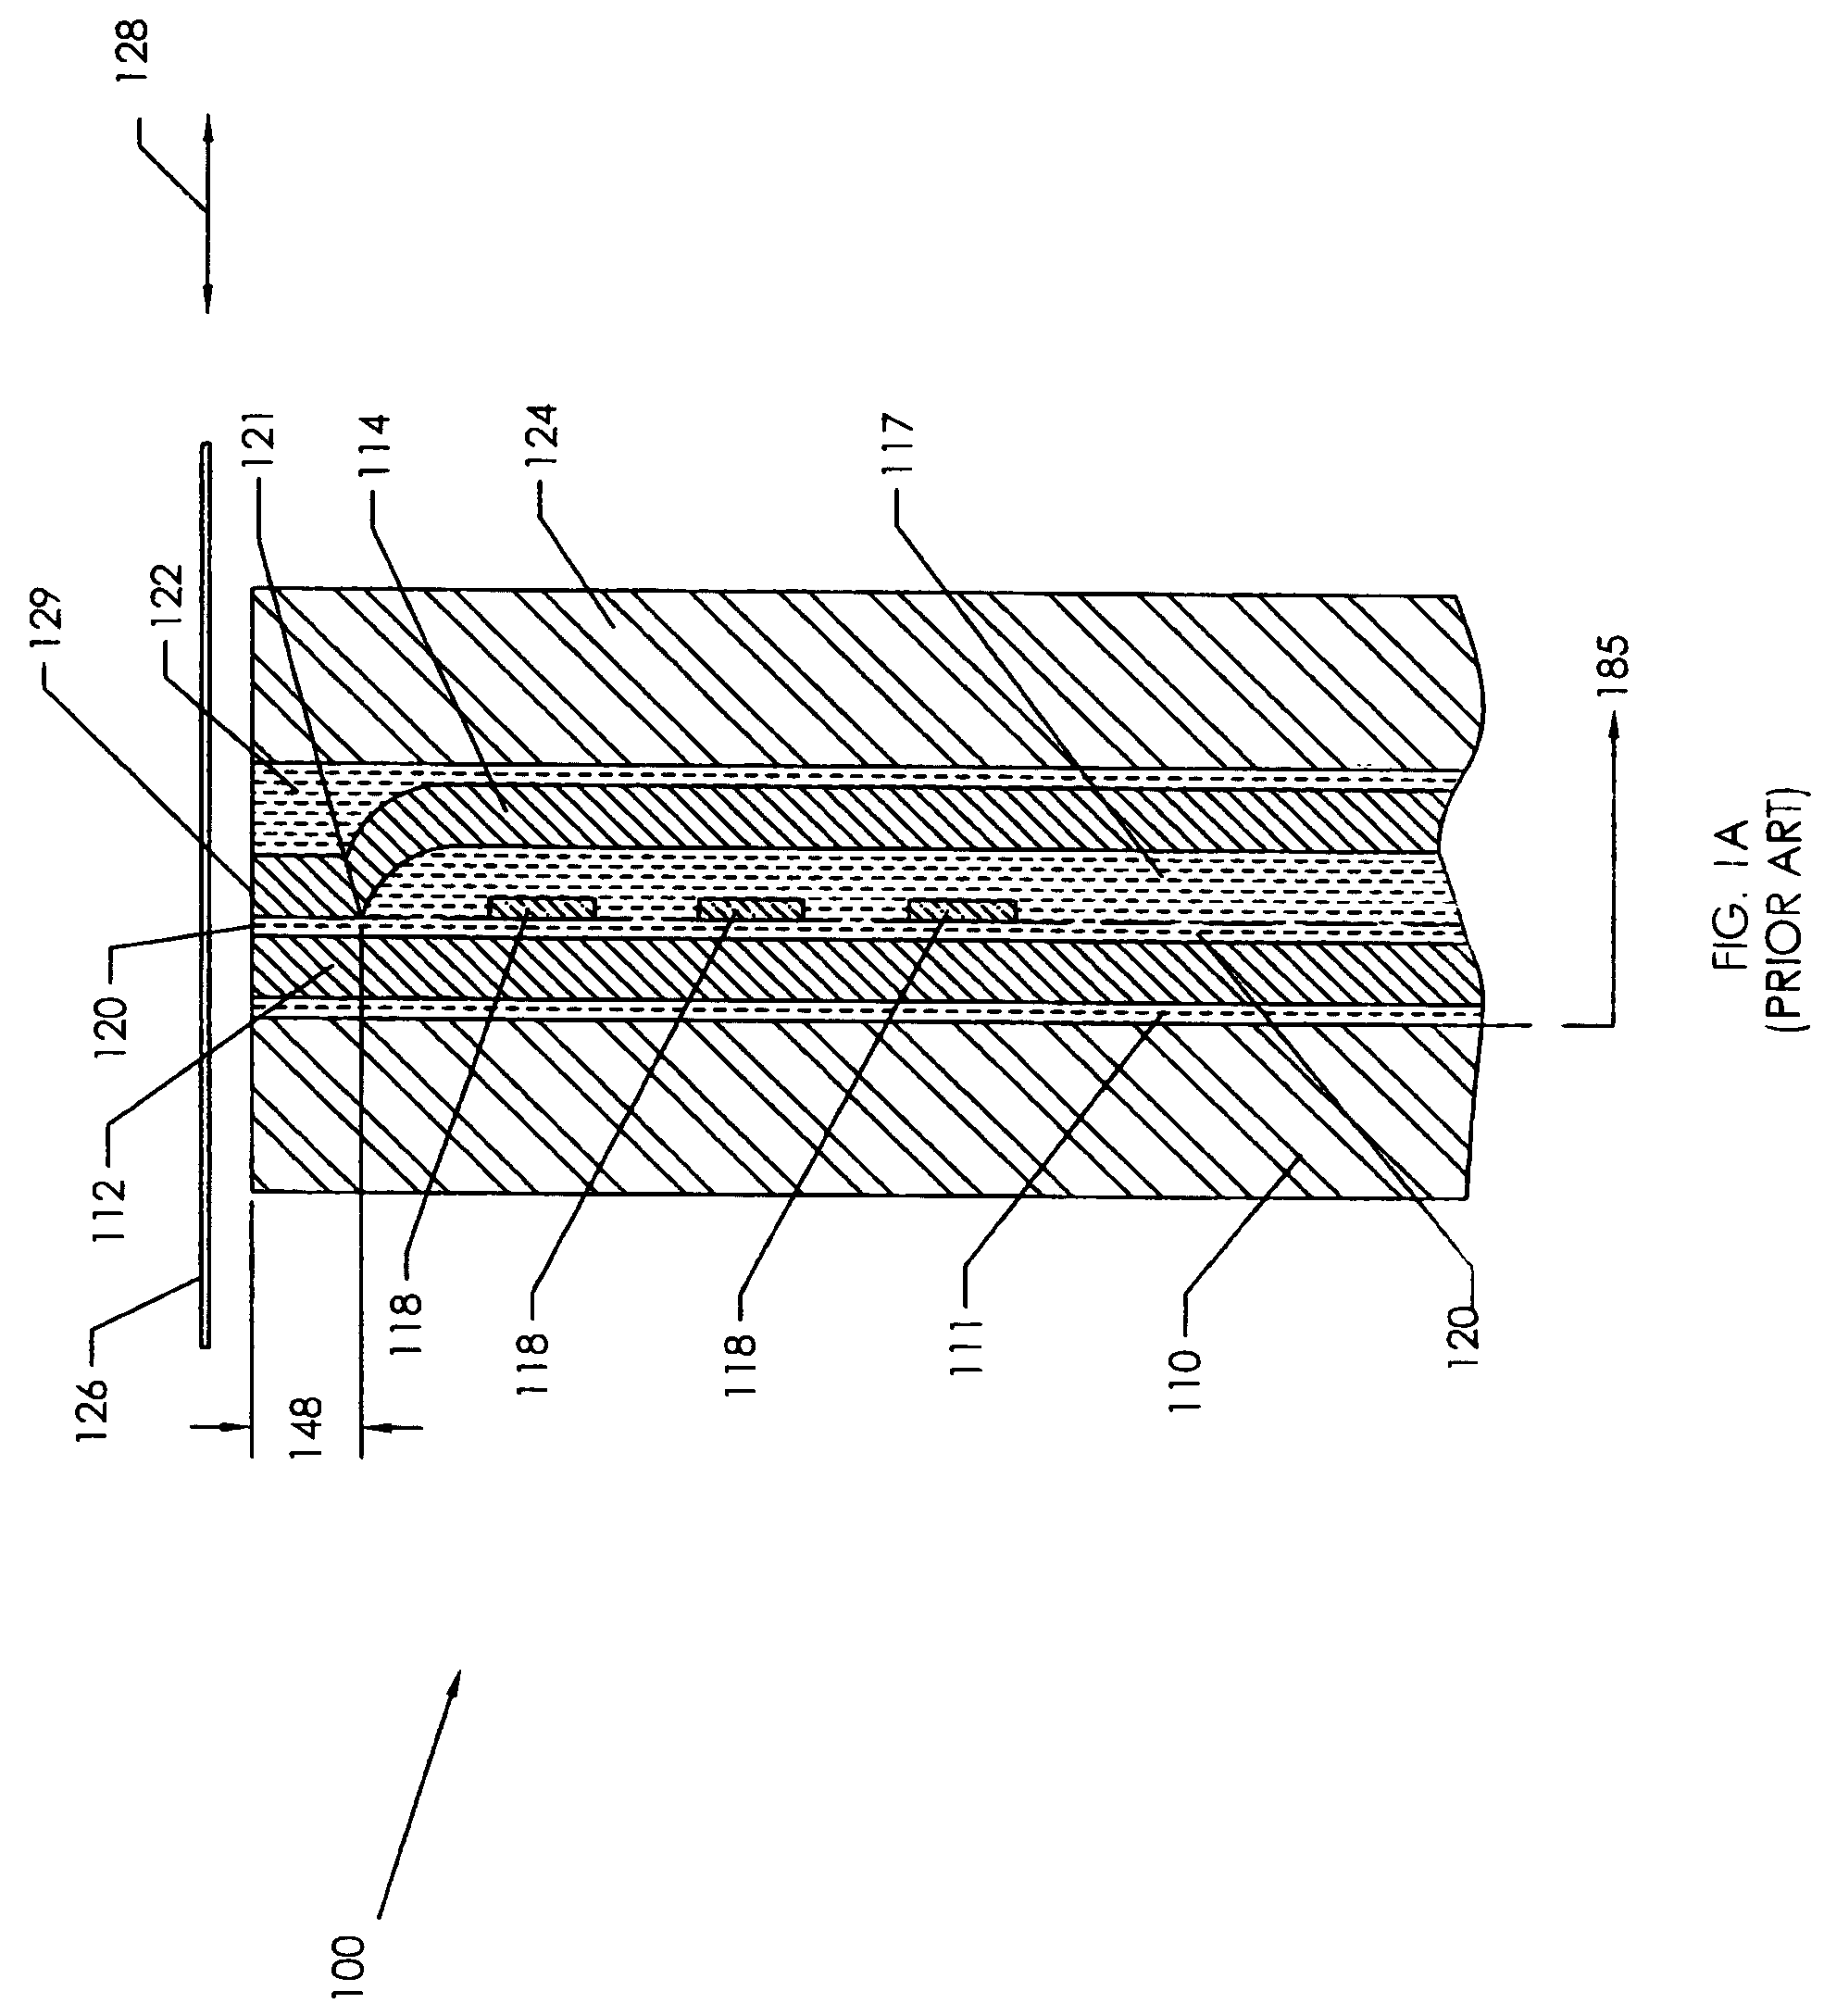 Intergrated thin film subgap subpole structure for arbitrary gap pattern magnetic recording heads and method of making the same